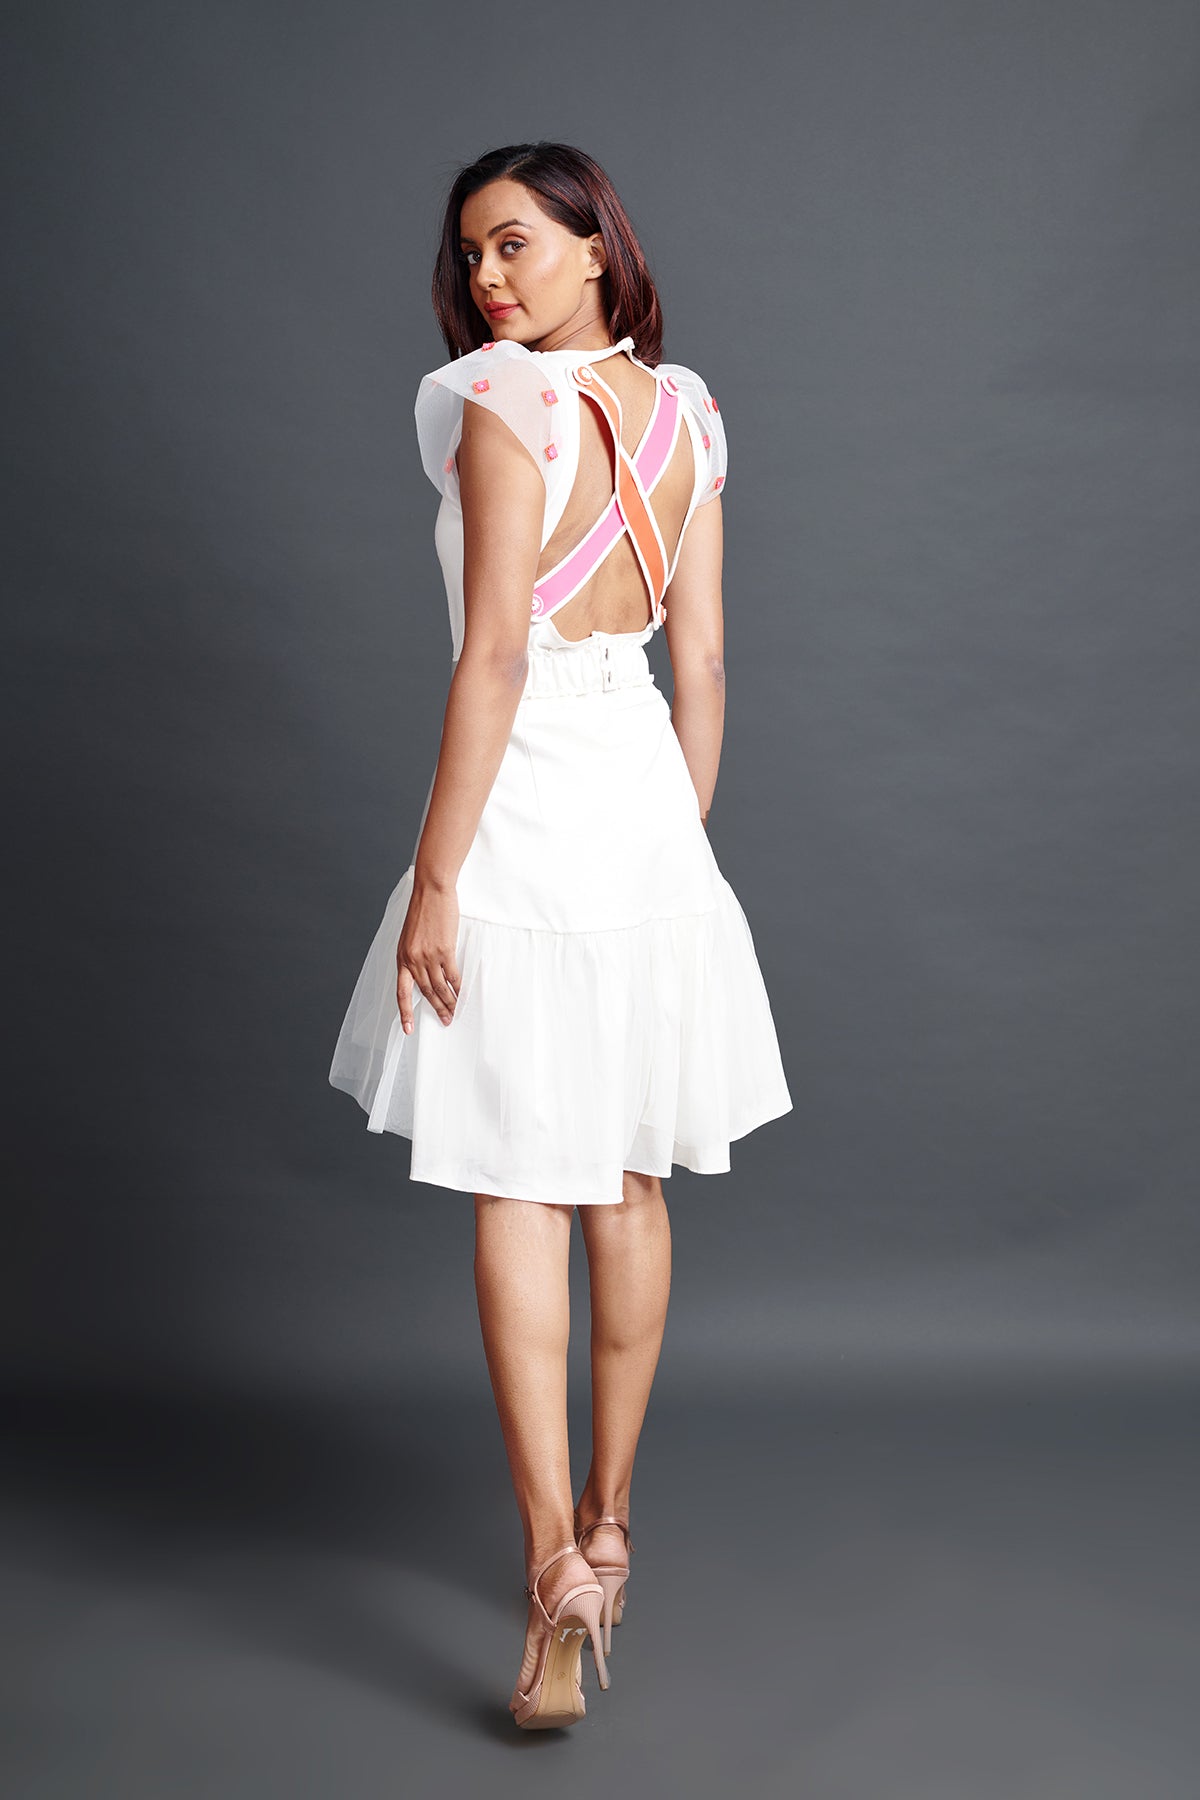 mage of WHITE NEON CROSS BODYSUIT WITH HIGH LOW SKIRT. From savoirfashions.com